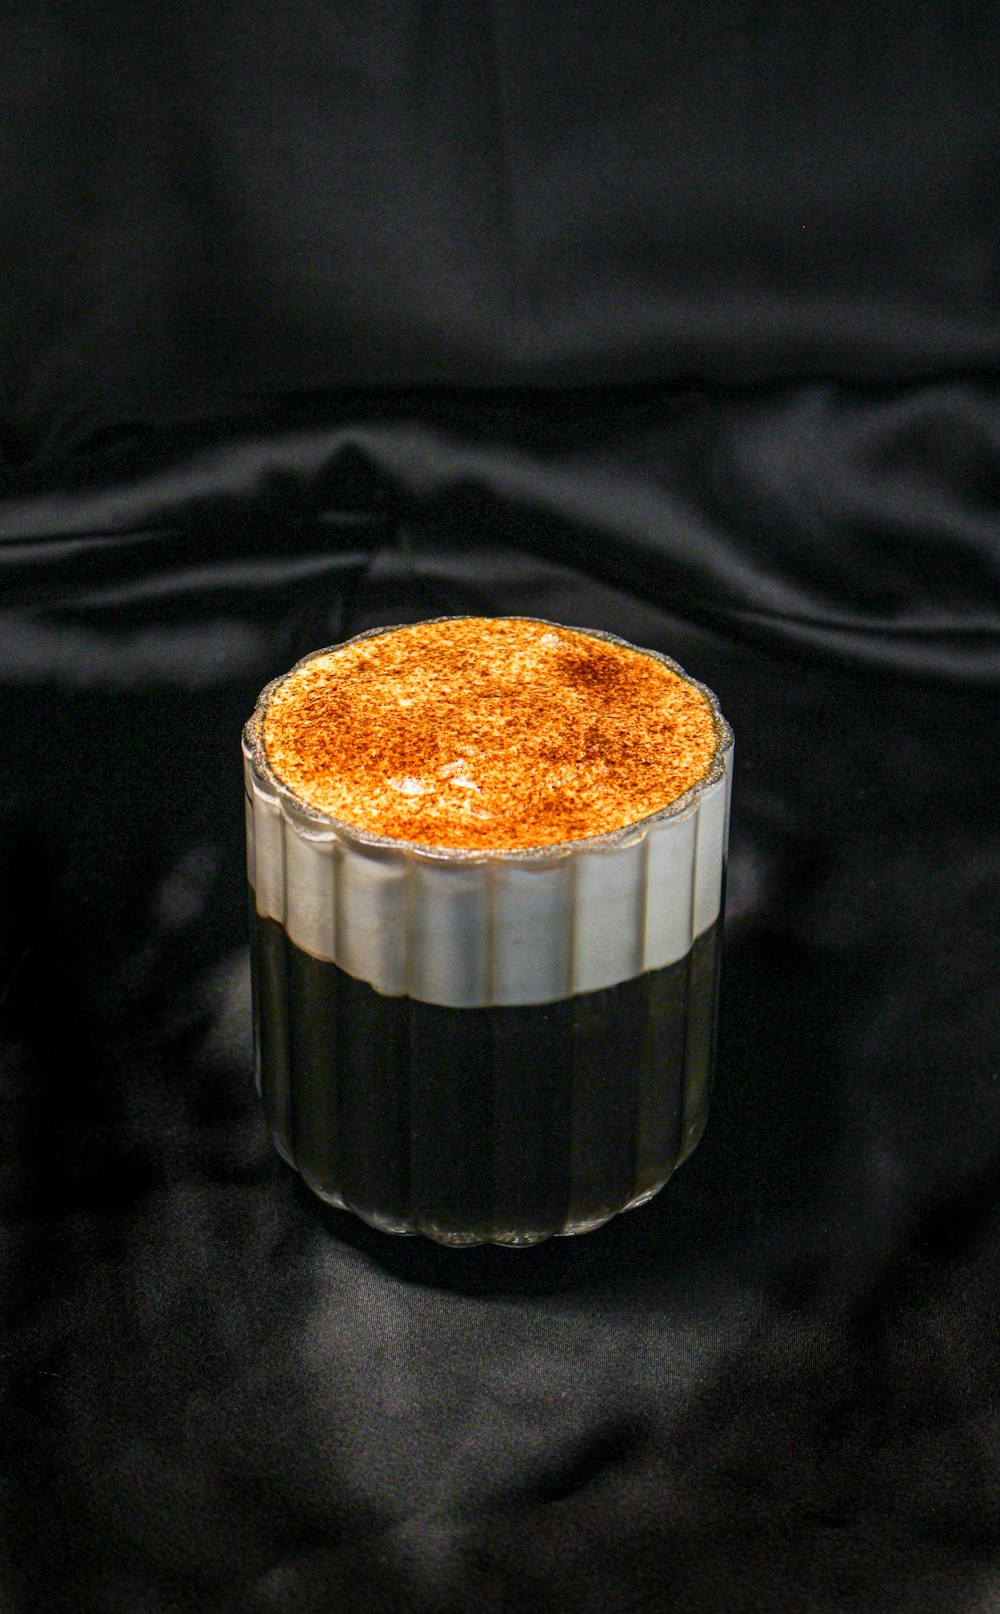 a cake in a glass container on a black cloth